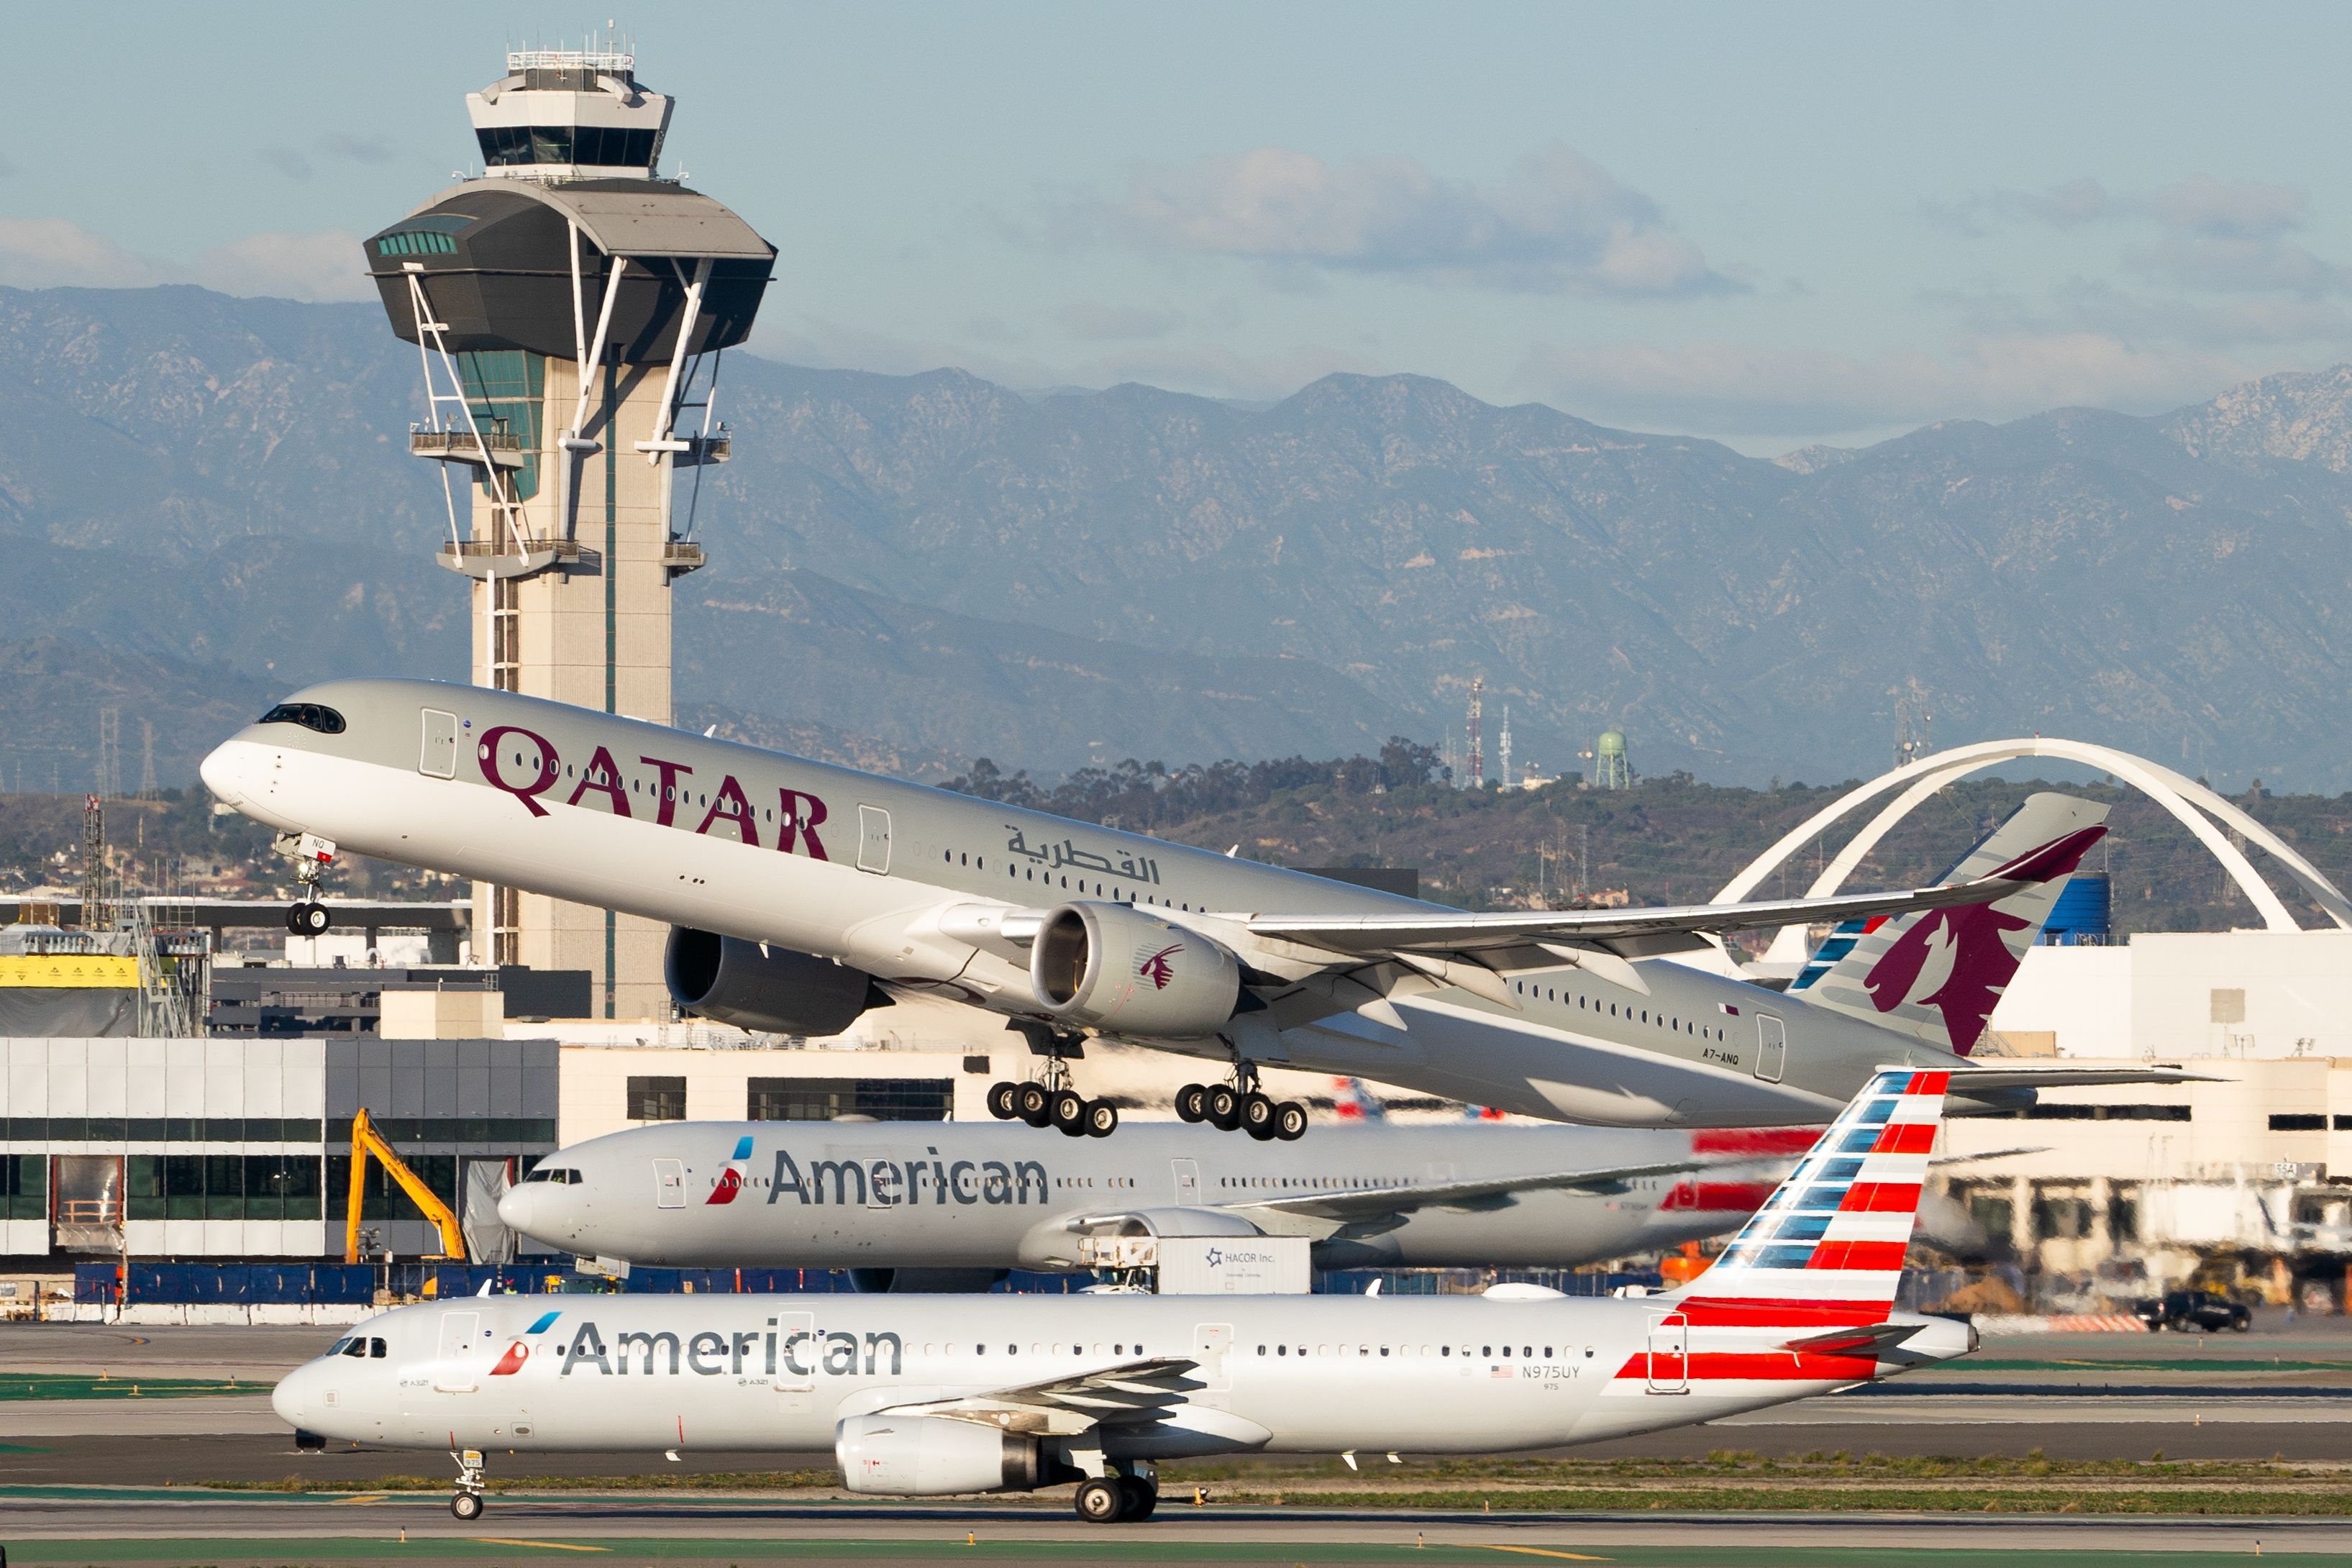 A Qatar Airlines Airbus A350 taking off in between two American Airlines jets. They are all part of the oneworld alliance